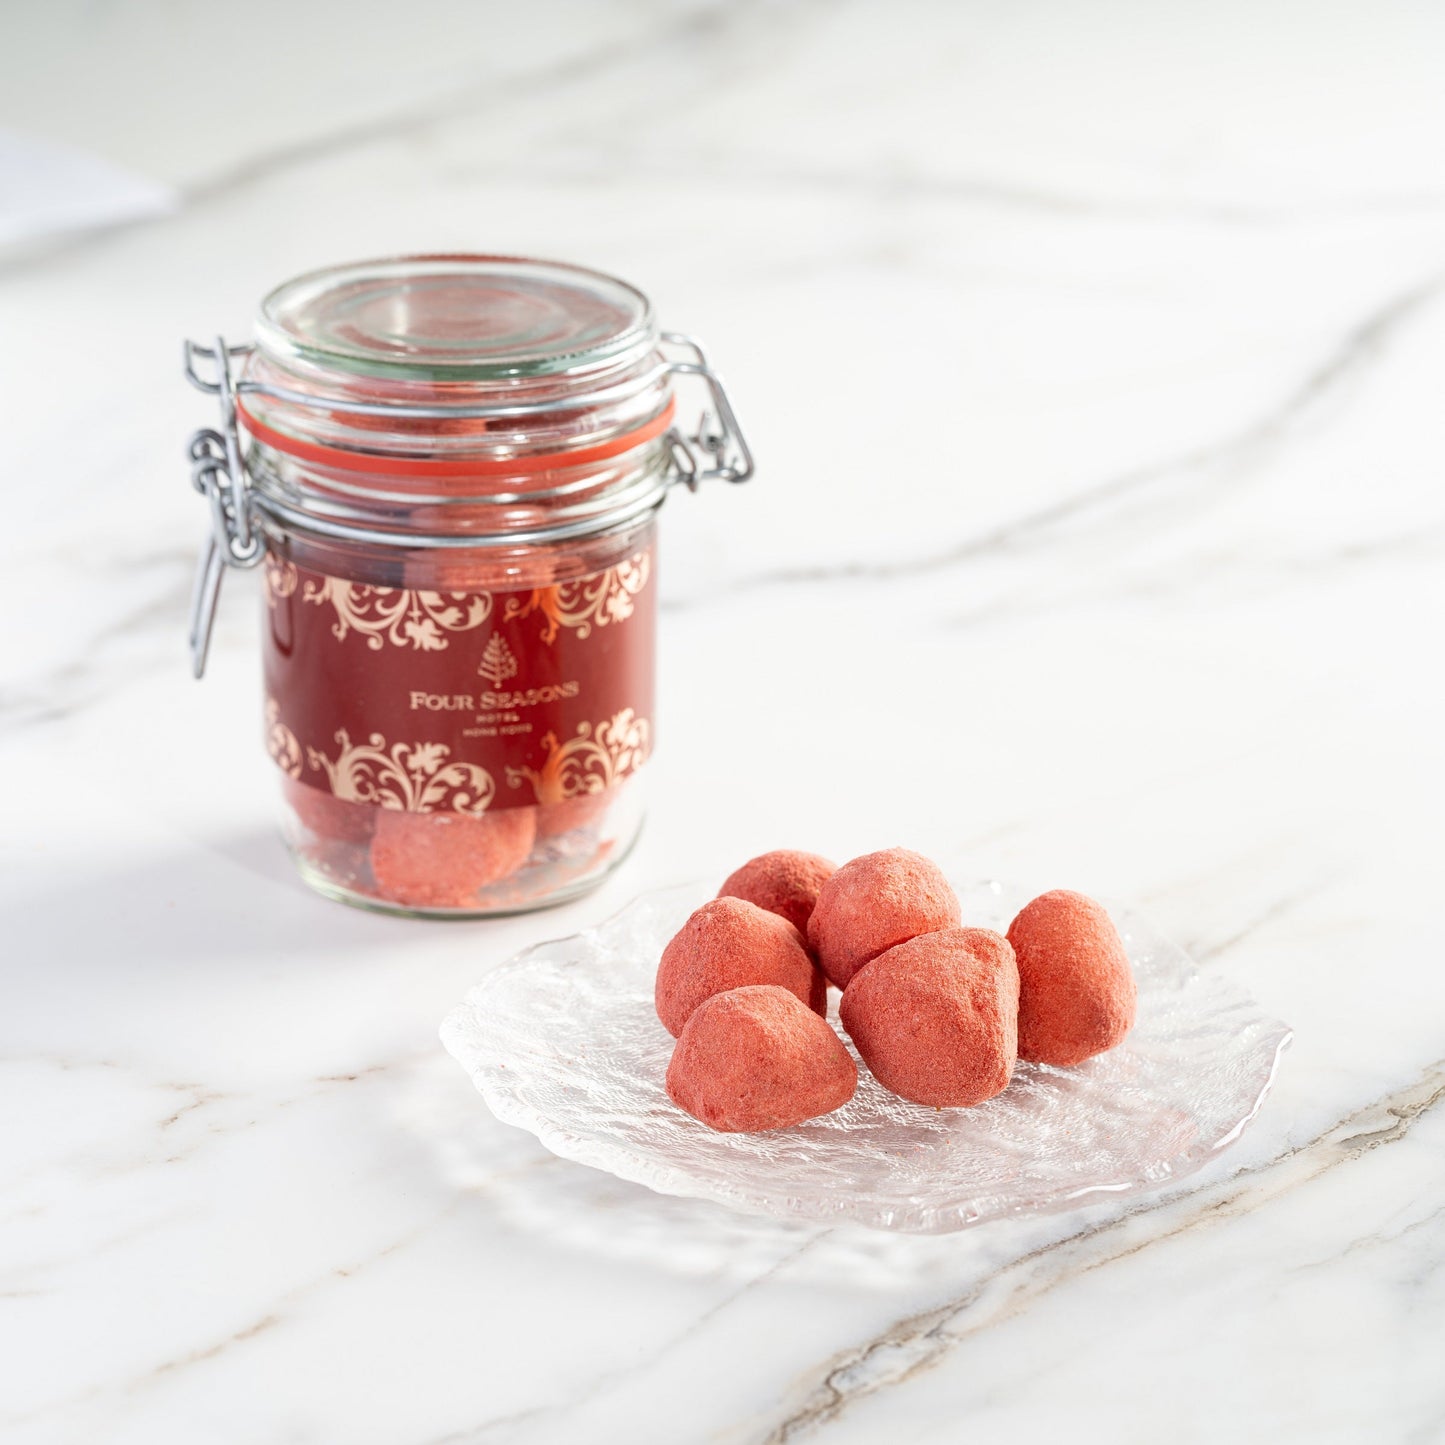 Freeze-dried Strawberry Dipped in Sugar-free White Chocolate in Jar (130g) 凍乾士多啤梨佐無糖白朱古力 (130g)